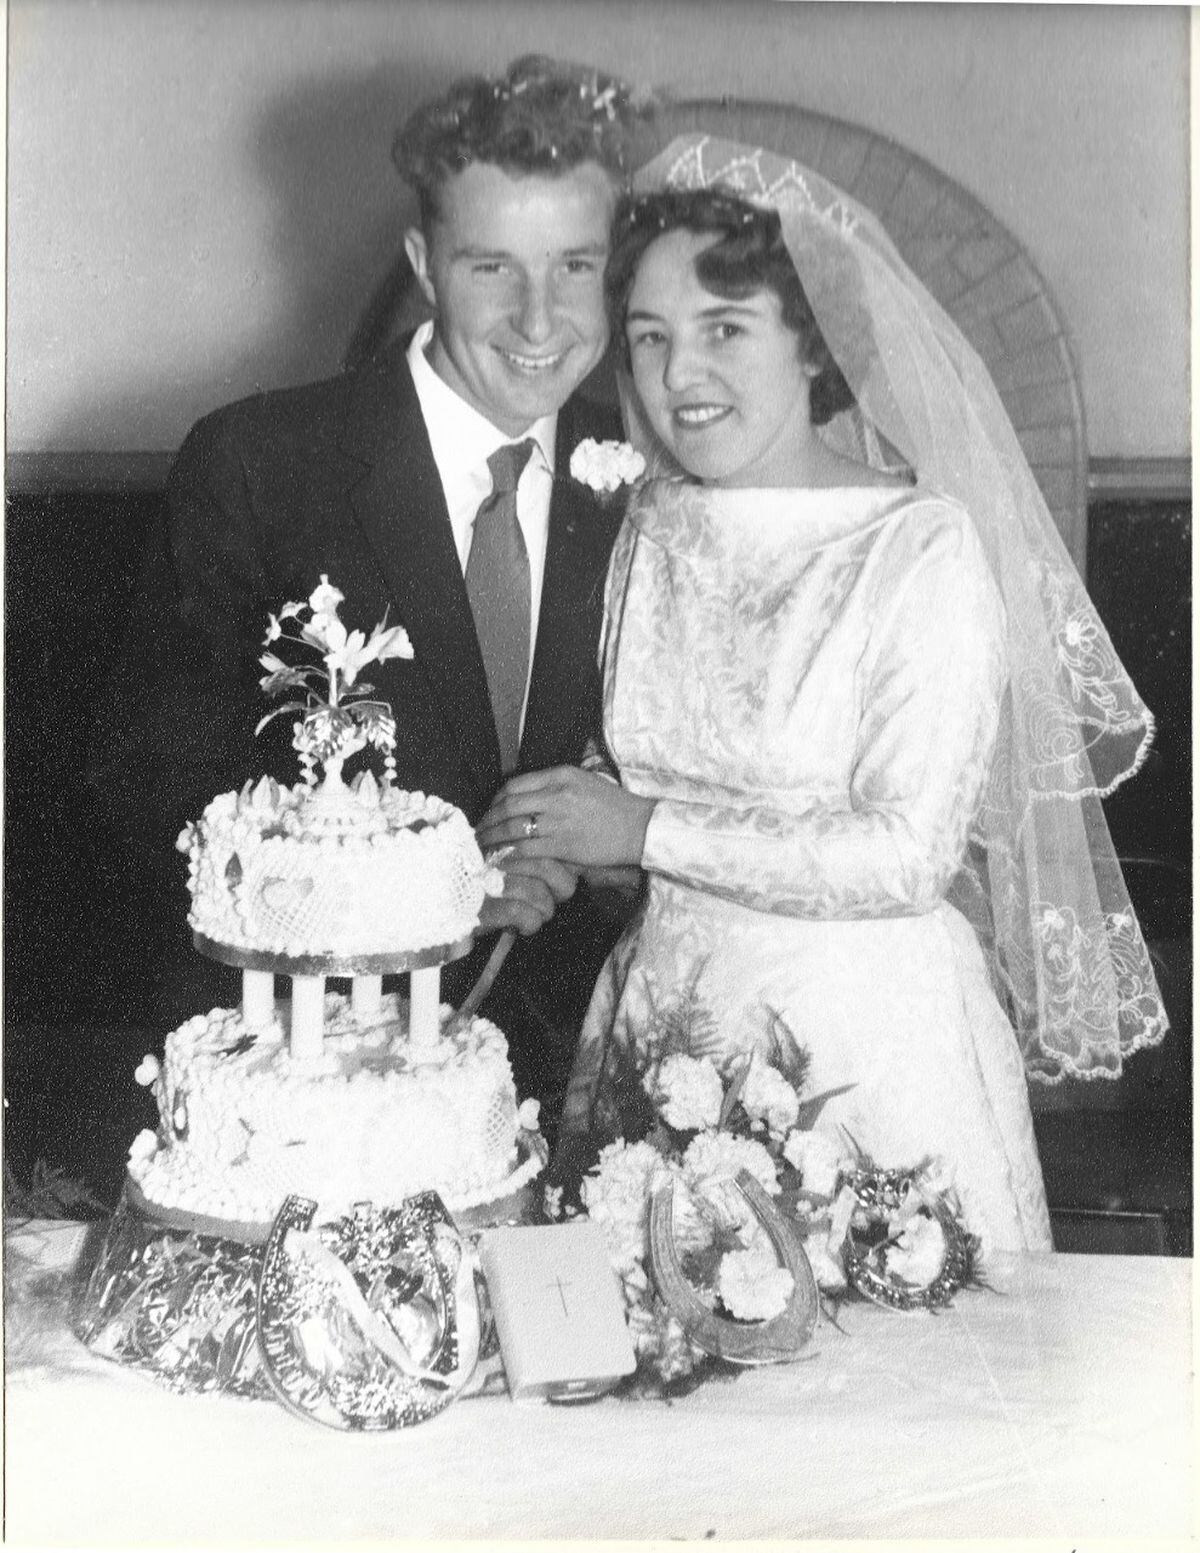 John Atkins on his wedding day to Violet Atkins, they had been married for more than 62 years